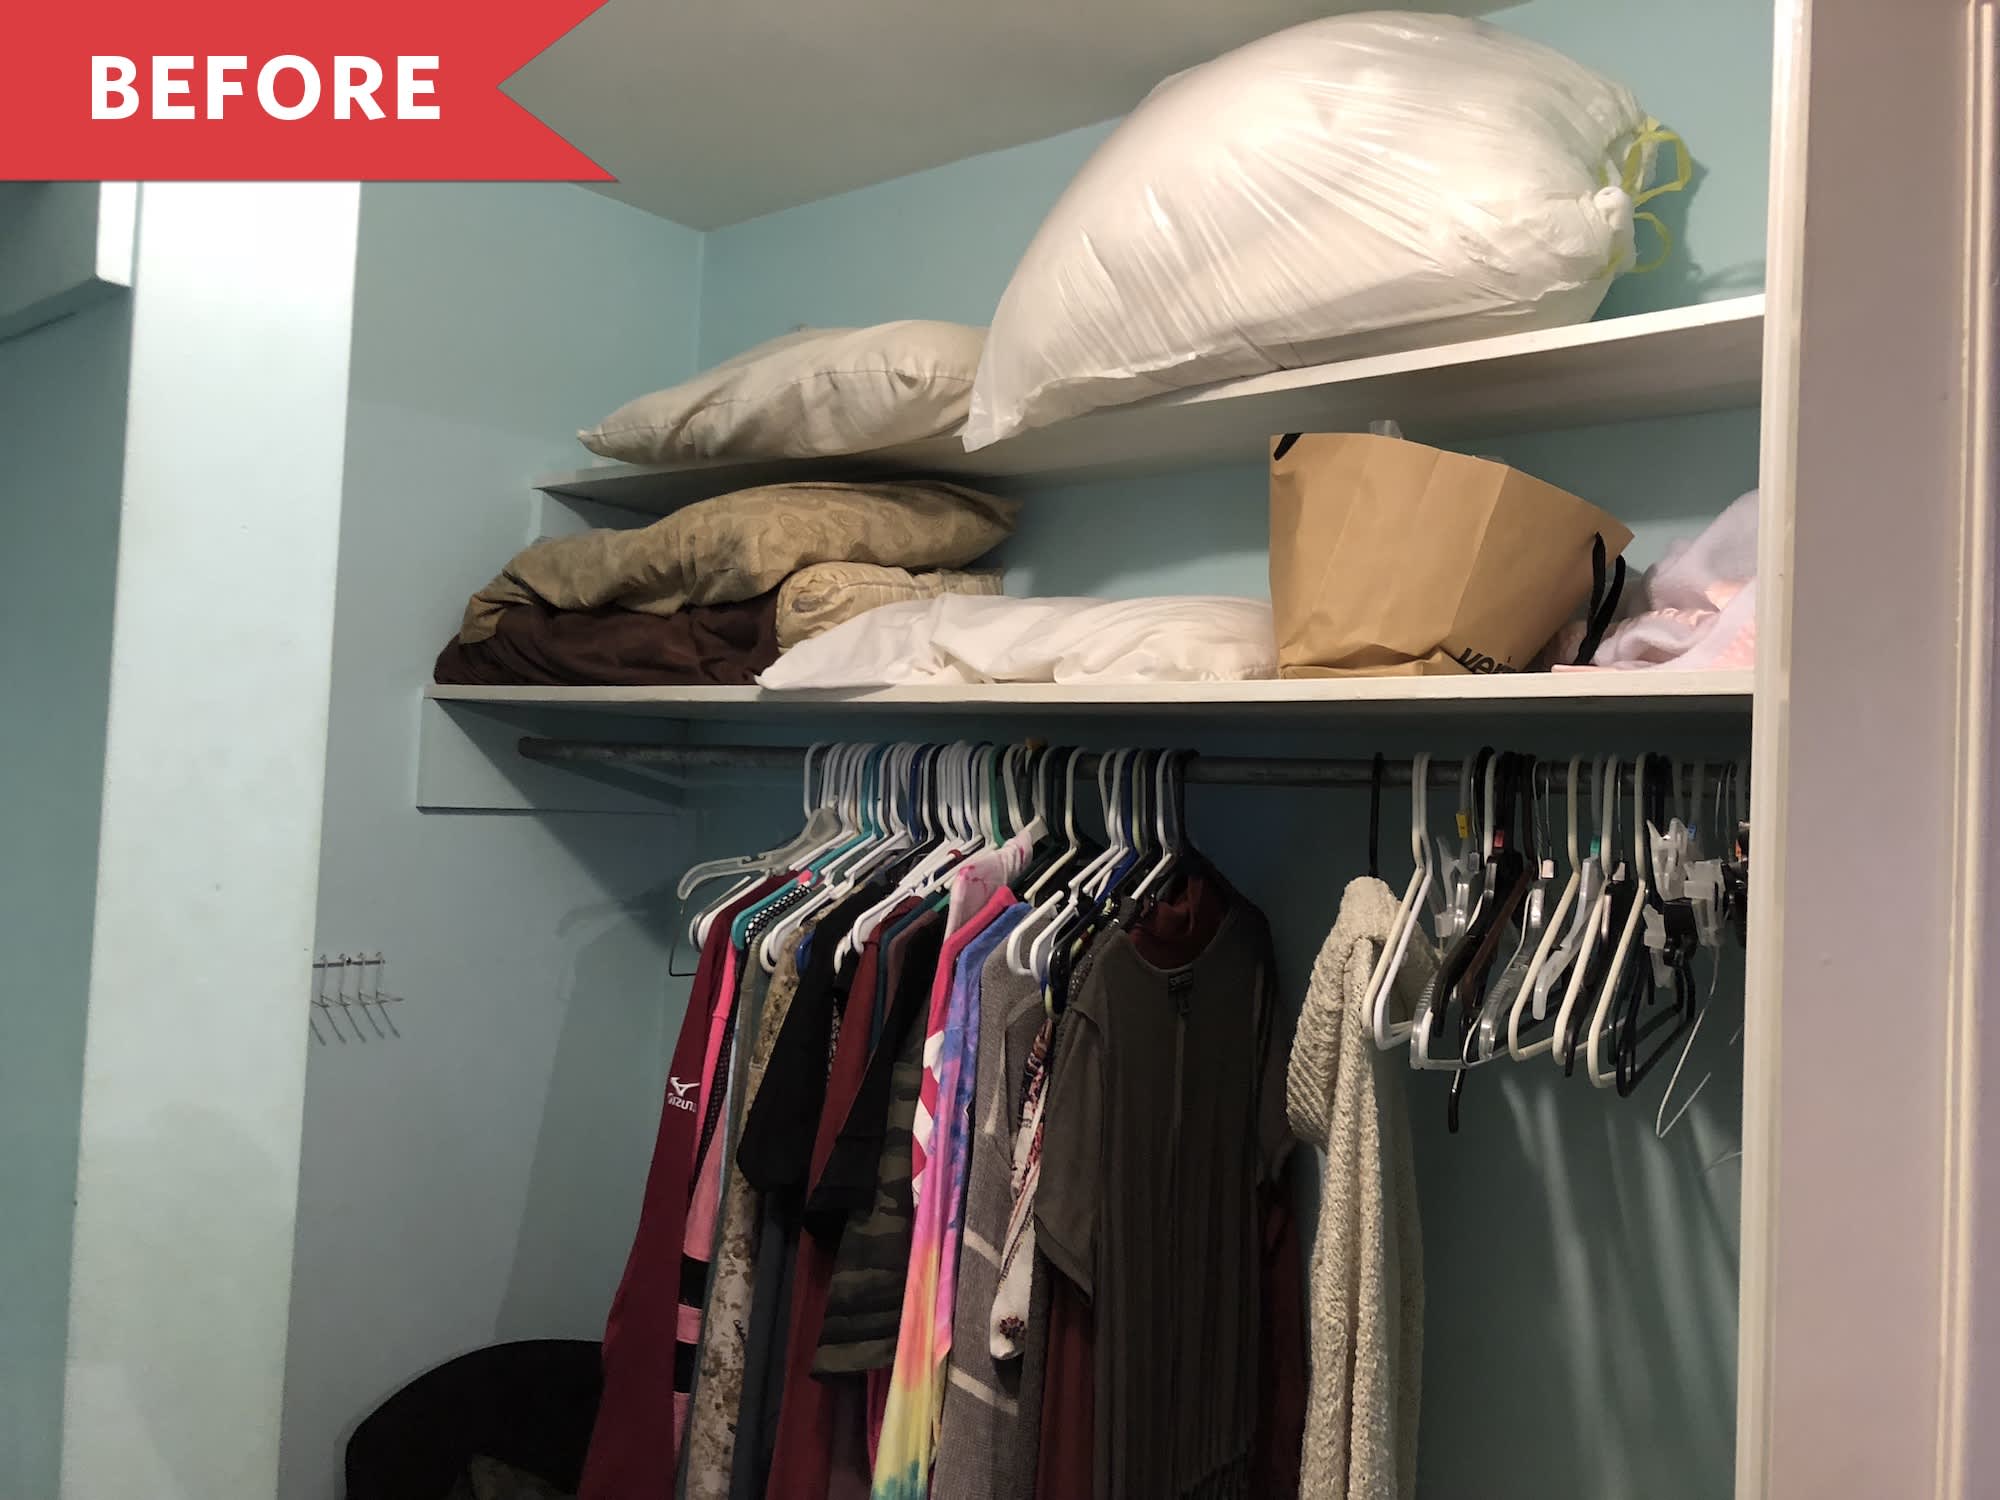 https://cdn.apartmenttherapy.info/image/upload/v1588284326/at/home-projects/2020-04/10636967_zoebleak-closetbefore4.jpg